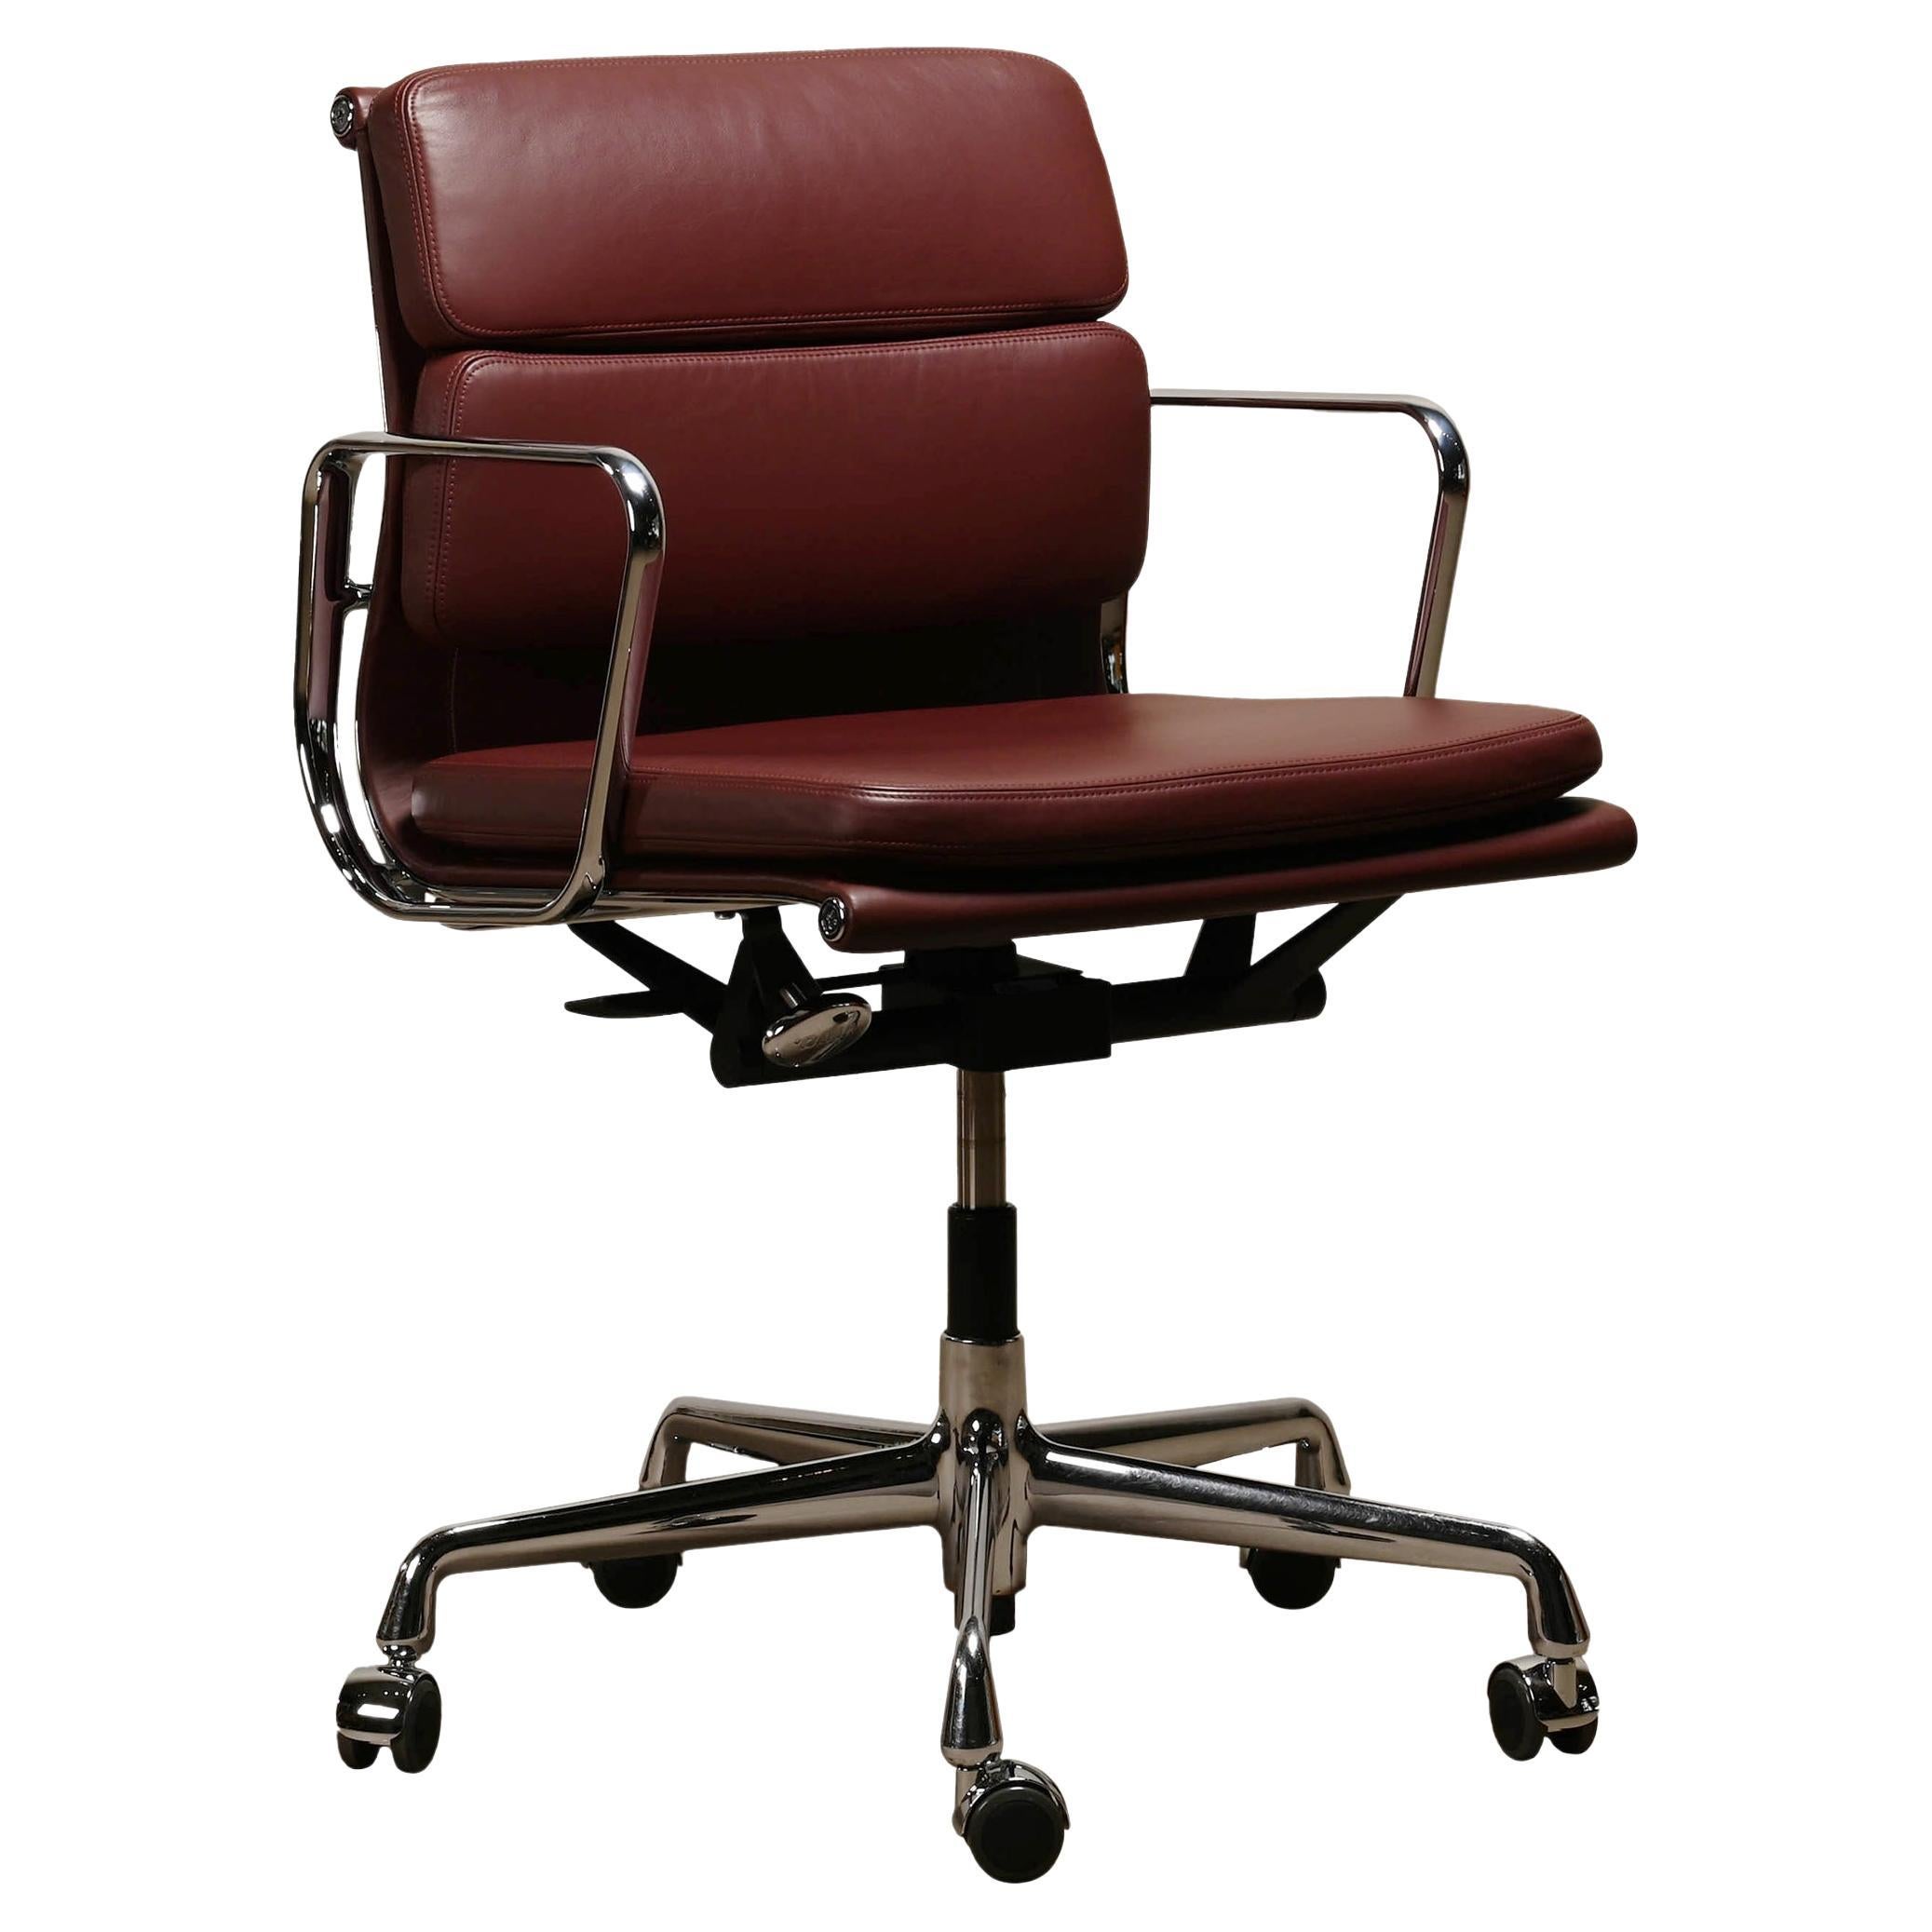 https://a.1stdibscdn.com/charles-ray-eames-ea217-office-chair-in-brandy-leather-and-chrome-vitra-for-sale/f_17102/f_304337221663226383004/f_30433722_1663226383885_bg_processed.jpg